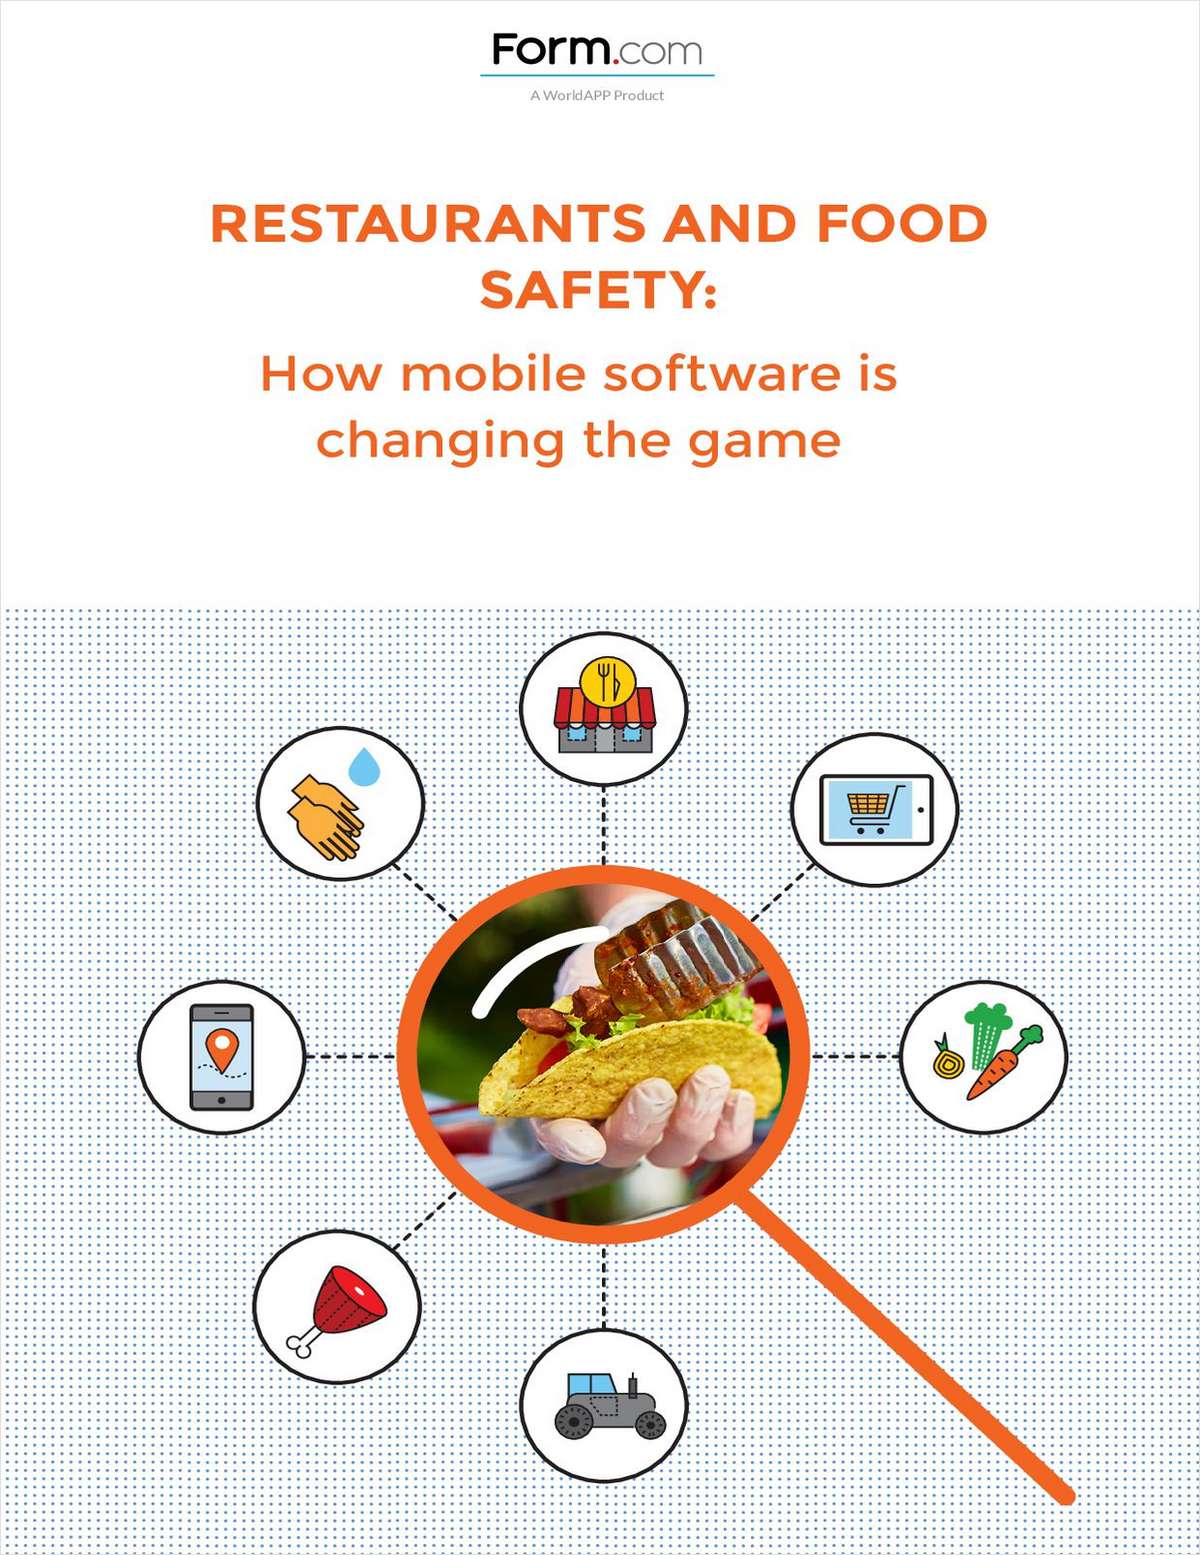 Restaurants and Food Safety: How Mobile Software is Changing the Game